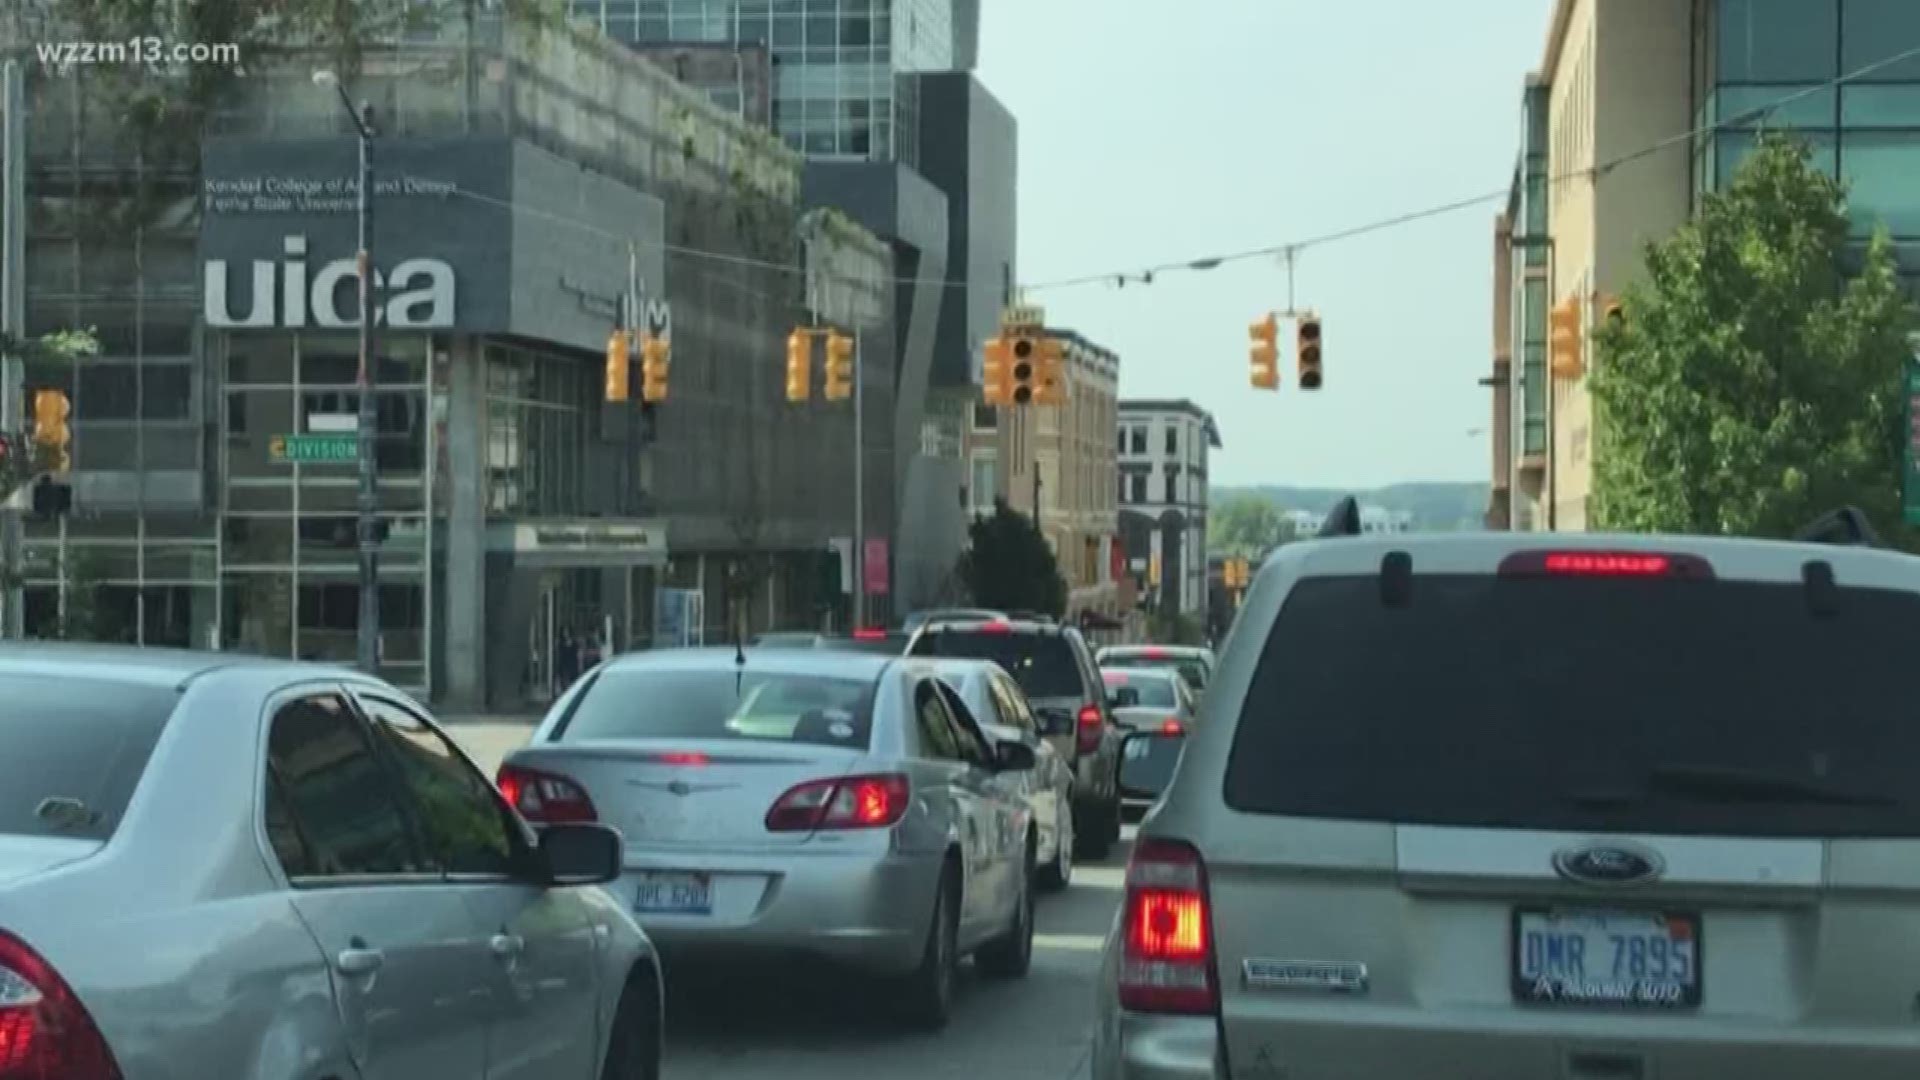 Power outage shuts down street lights in downtown Grand Rapids